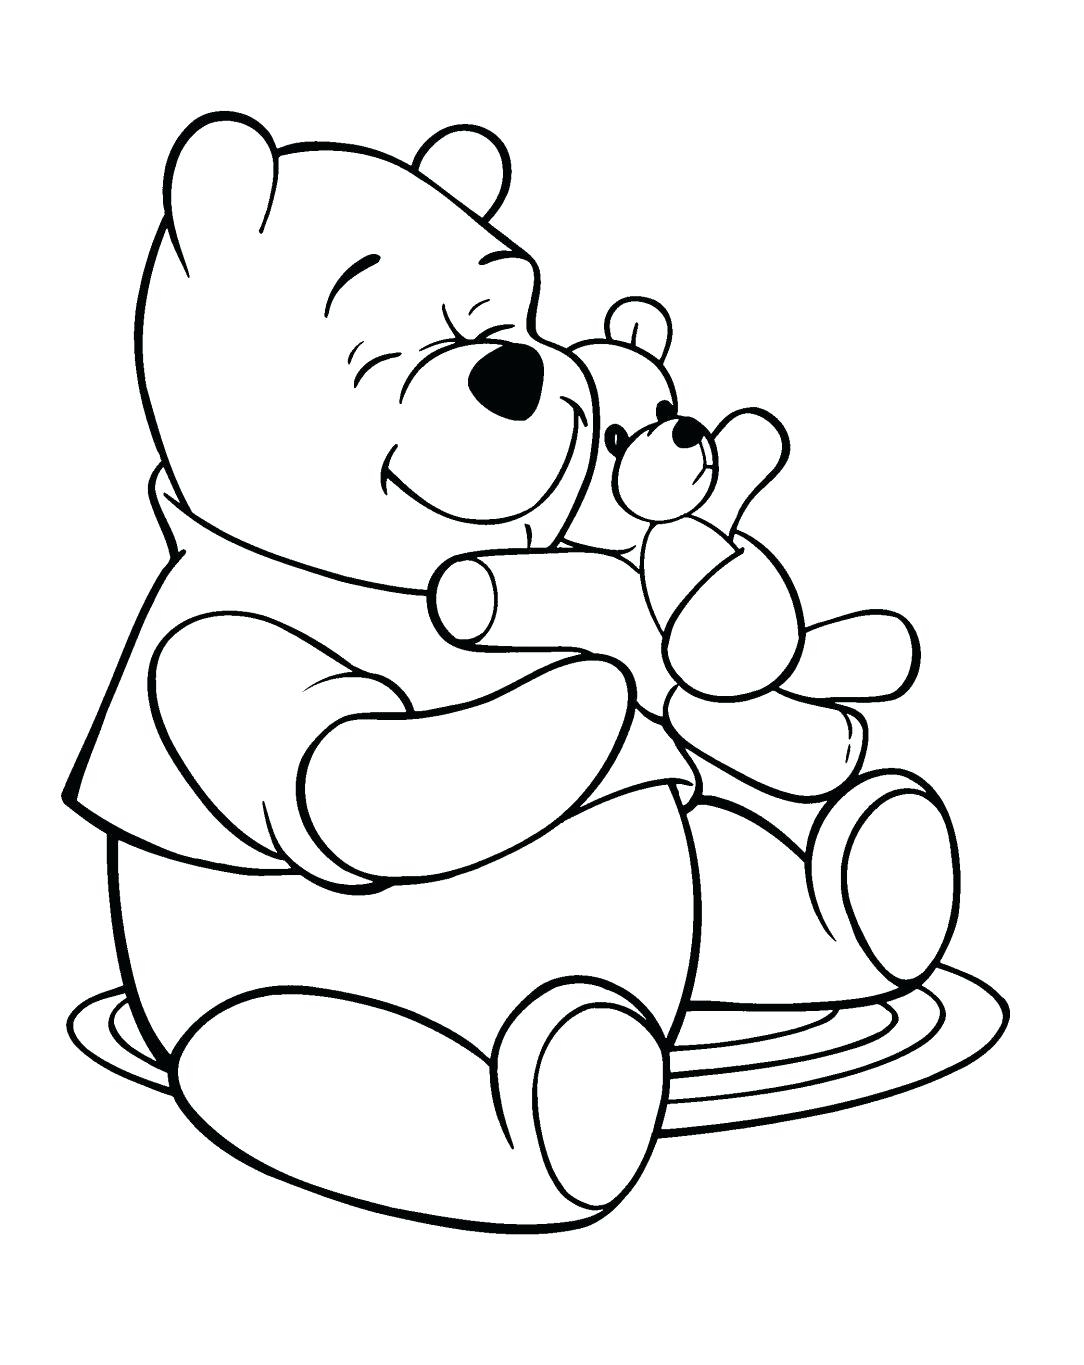 Smokey The Bear Coloring Pages Panda Bear Coloring Pictures Thamessheetco